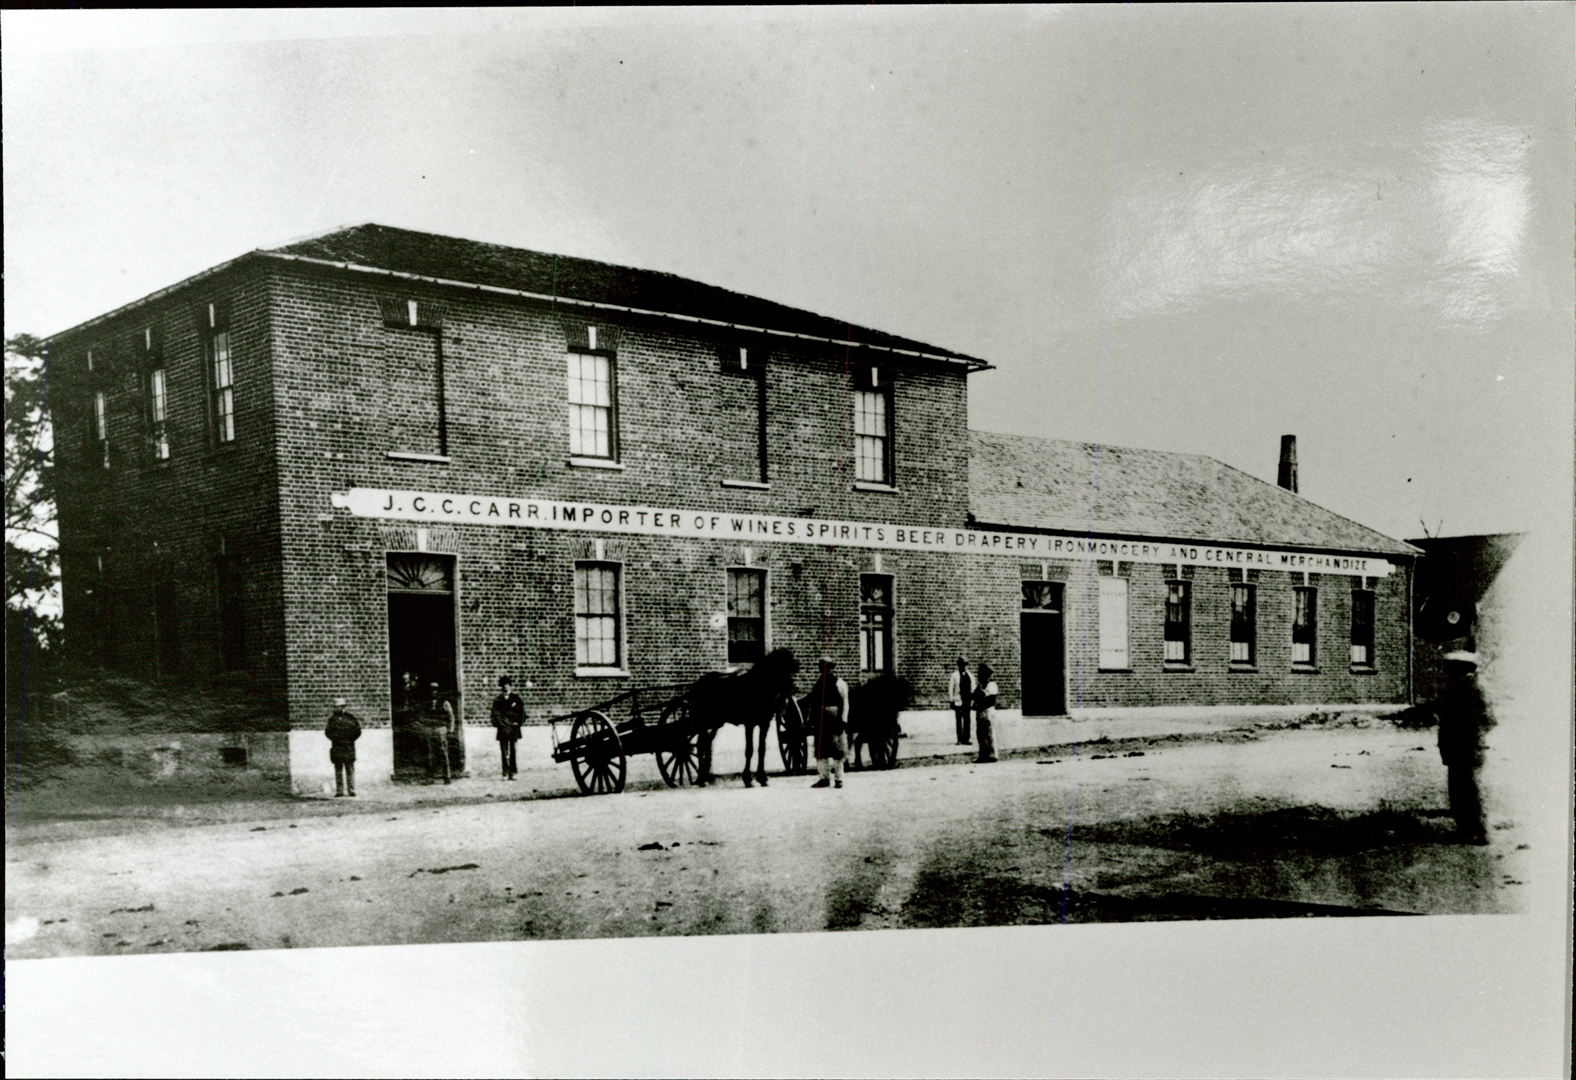 PH00030-01 Offices of J G C Carr Importers possibly William Street Perth c 1850 late 1870s (PH90024) Image